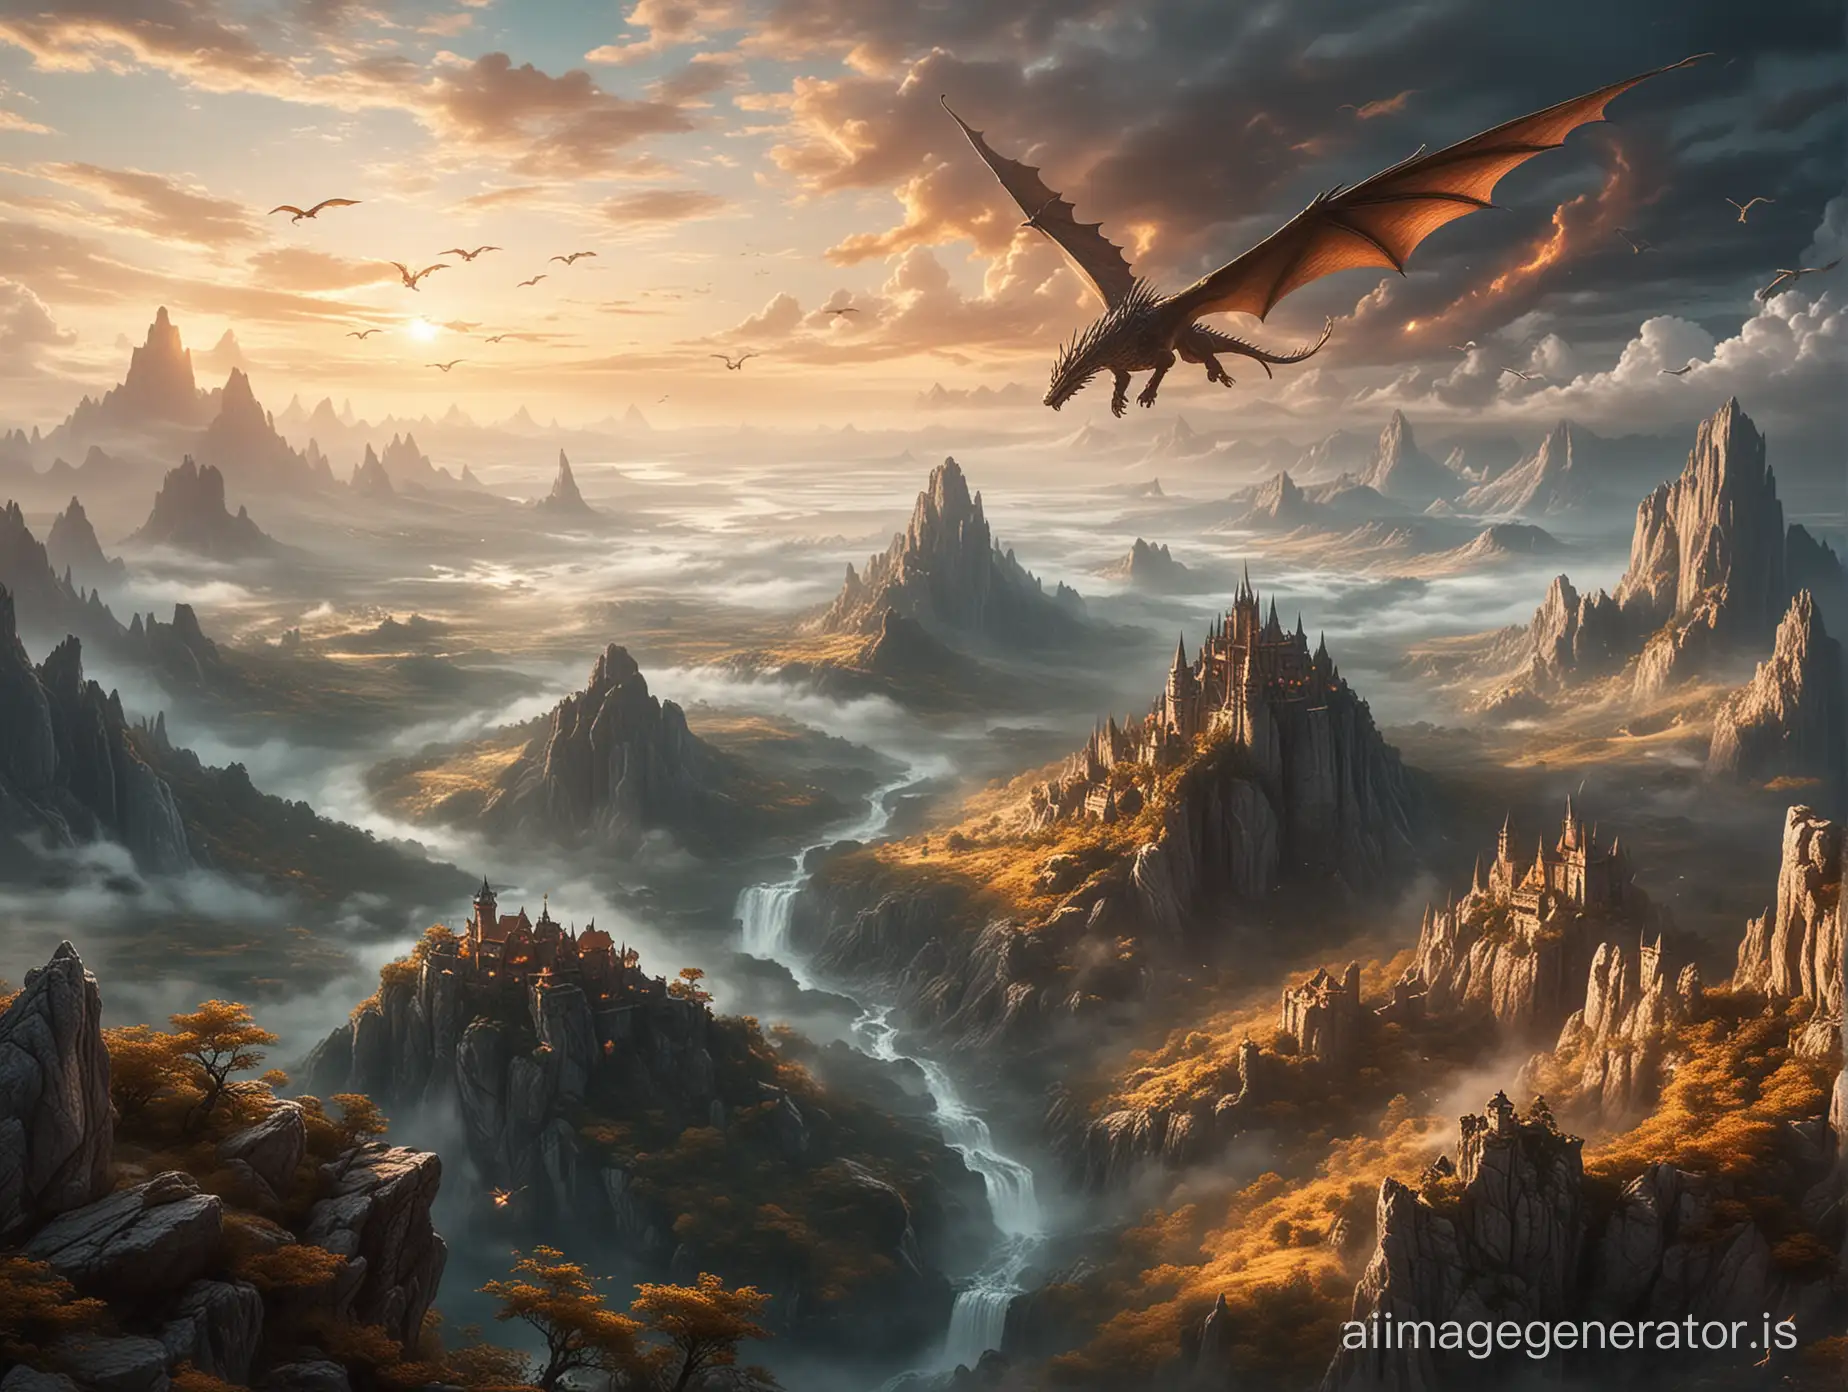 mythical landscape where dragons fly